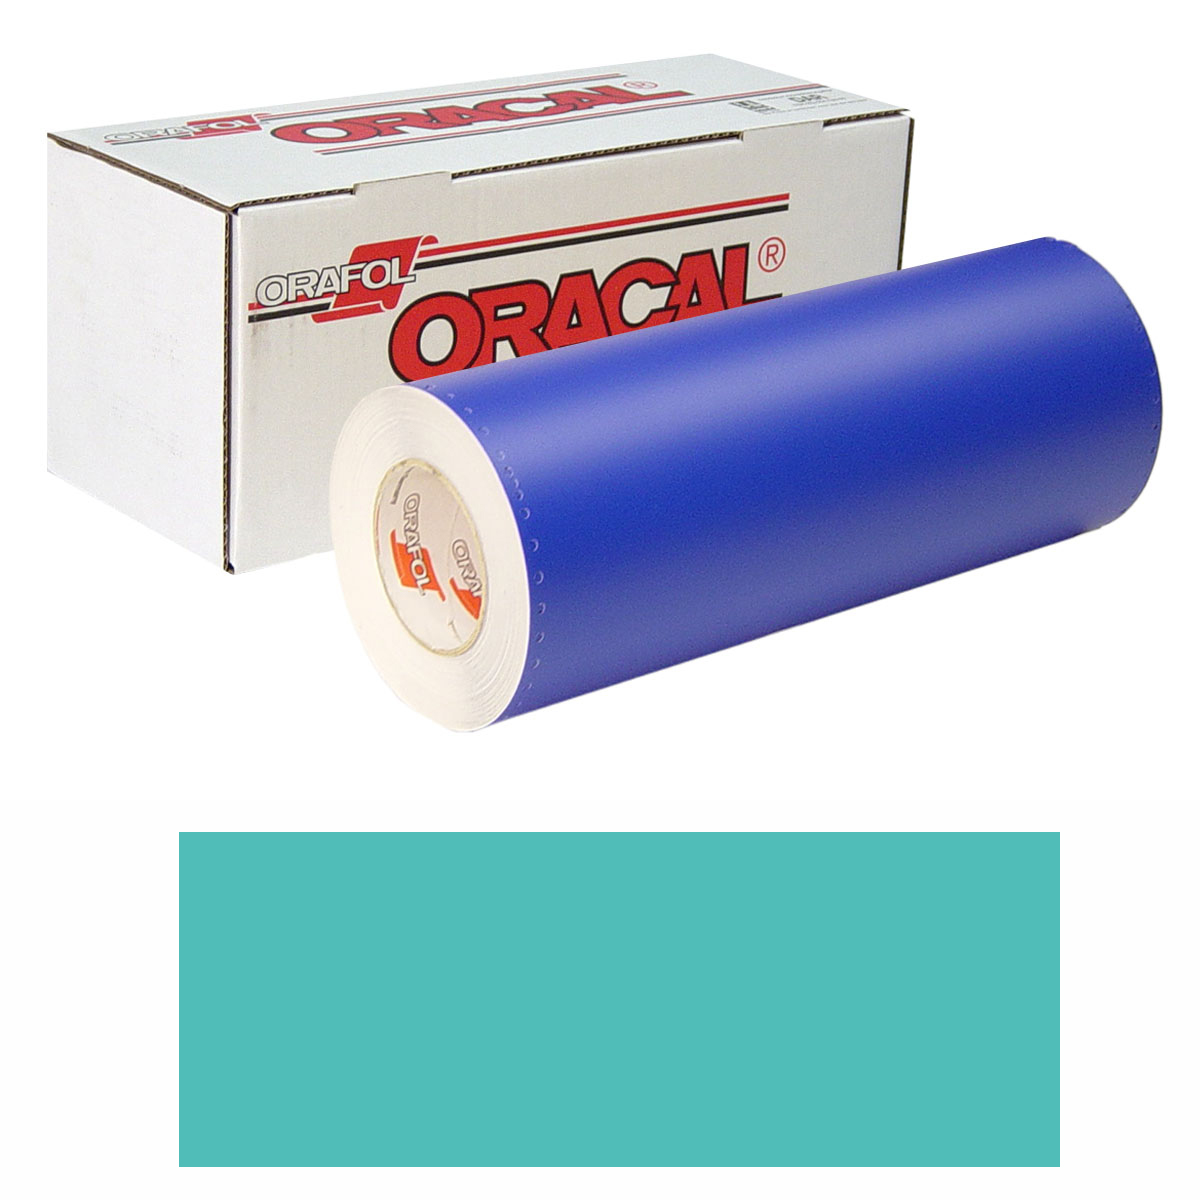 ORACAL 8300 15in X 50yd 054 Turquoise